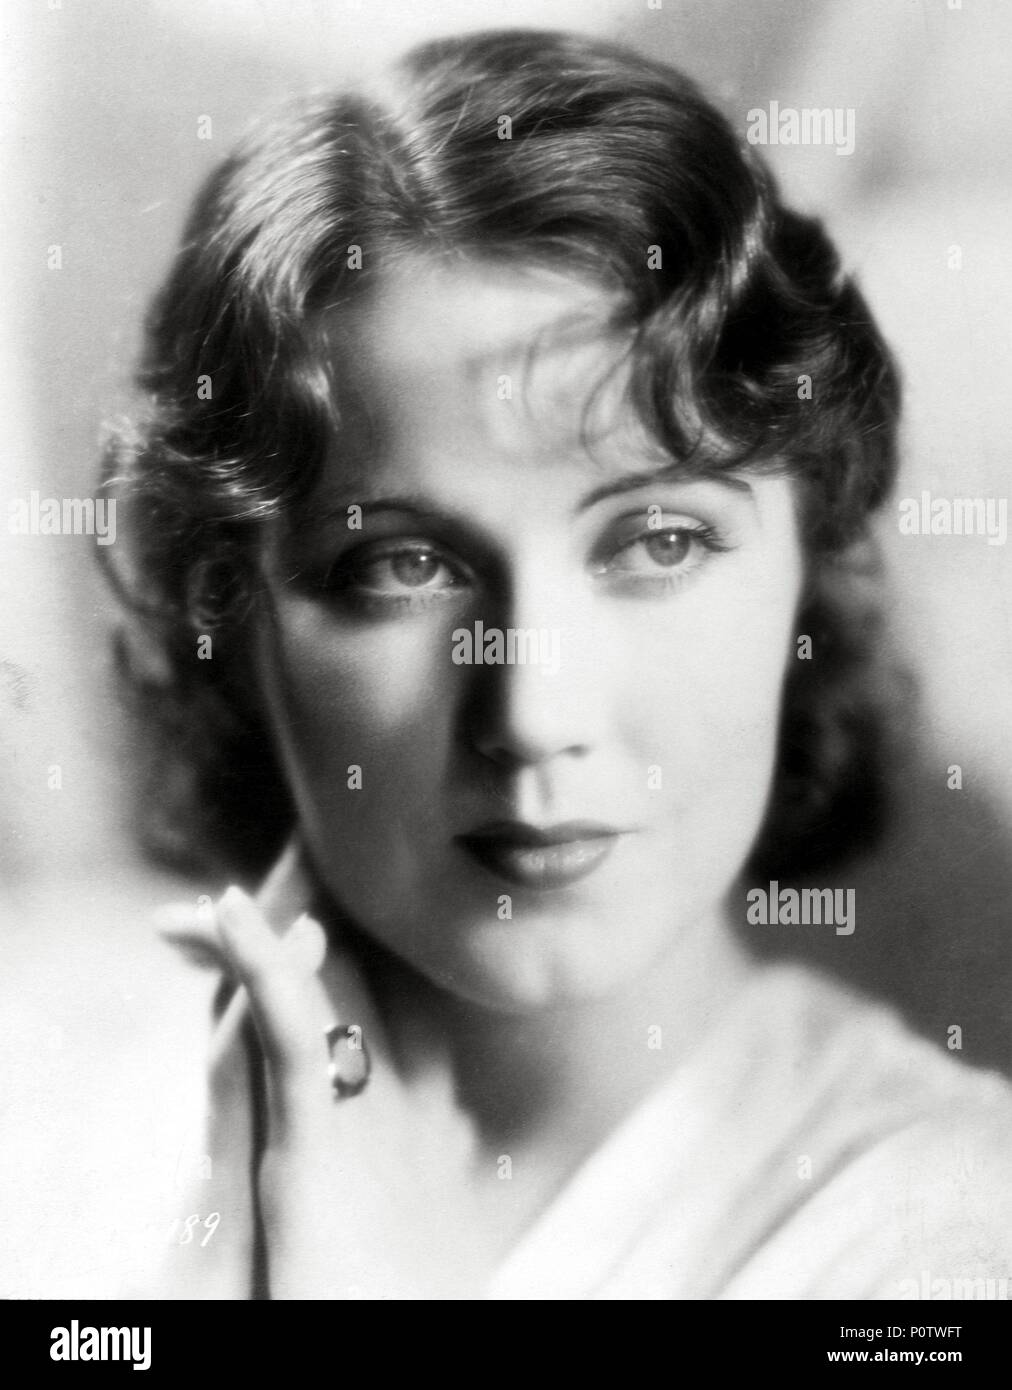 Fay wray images